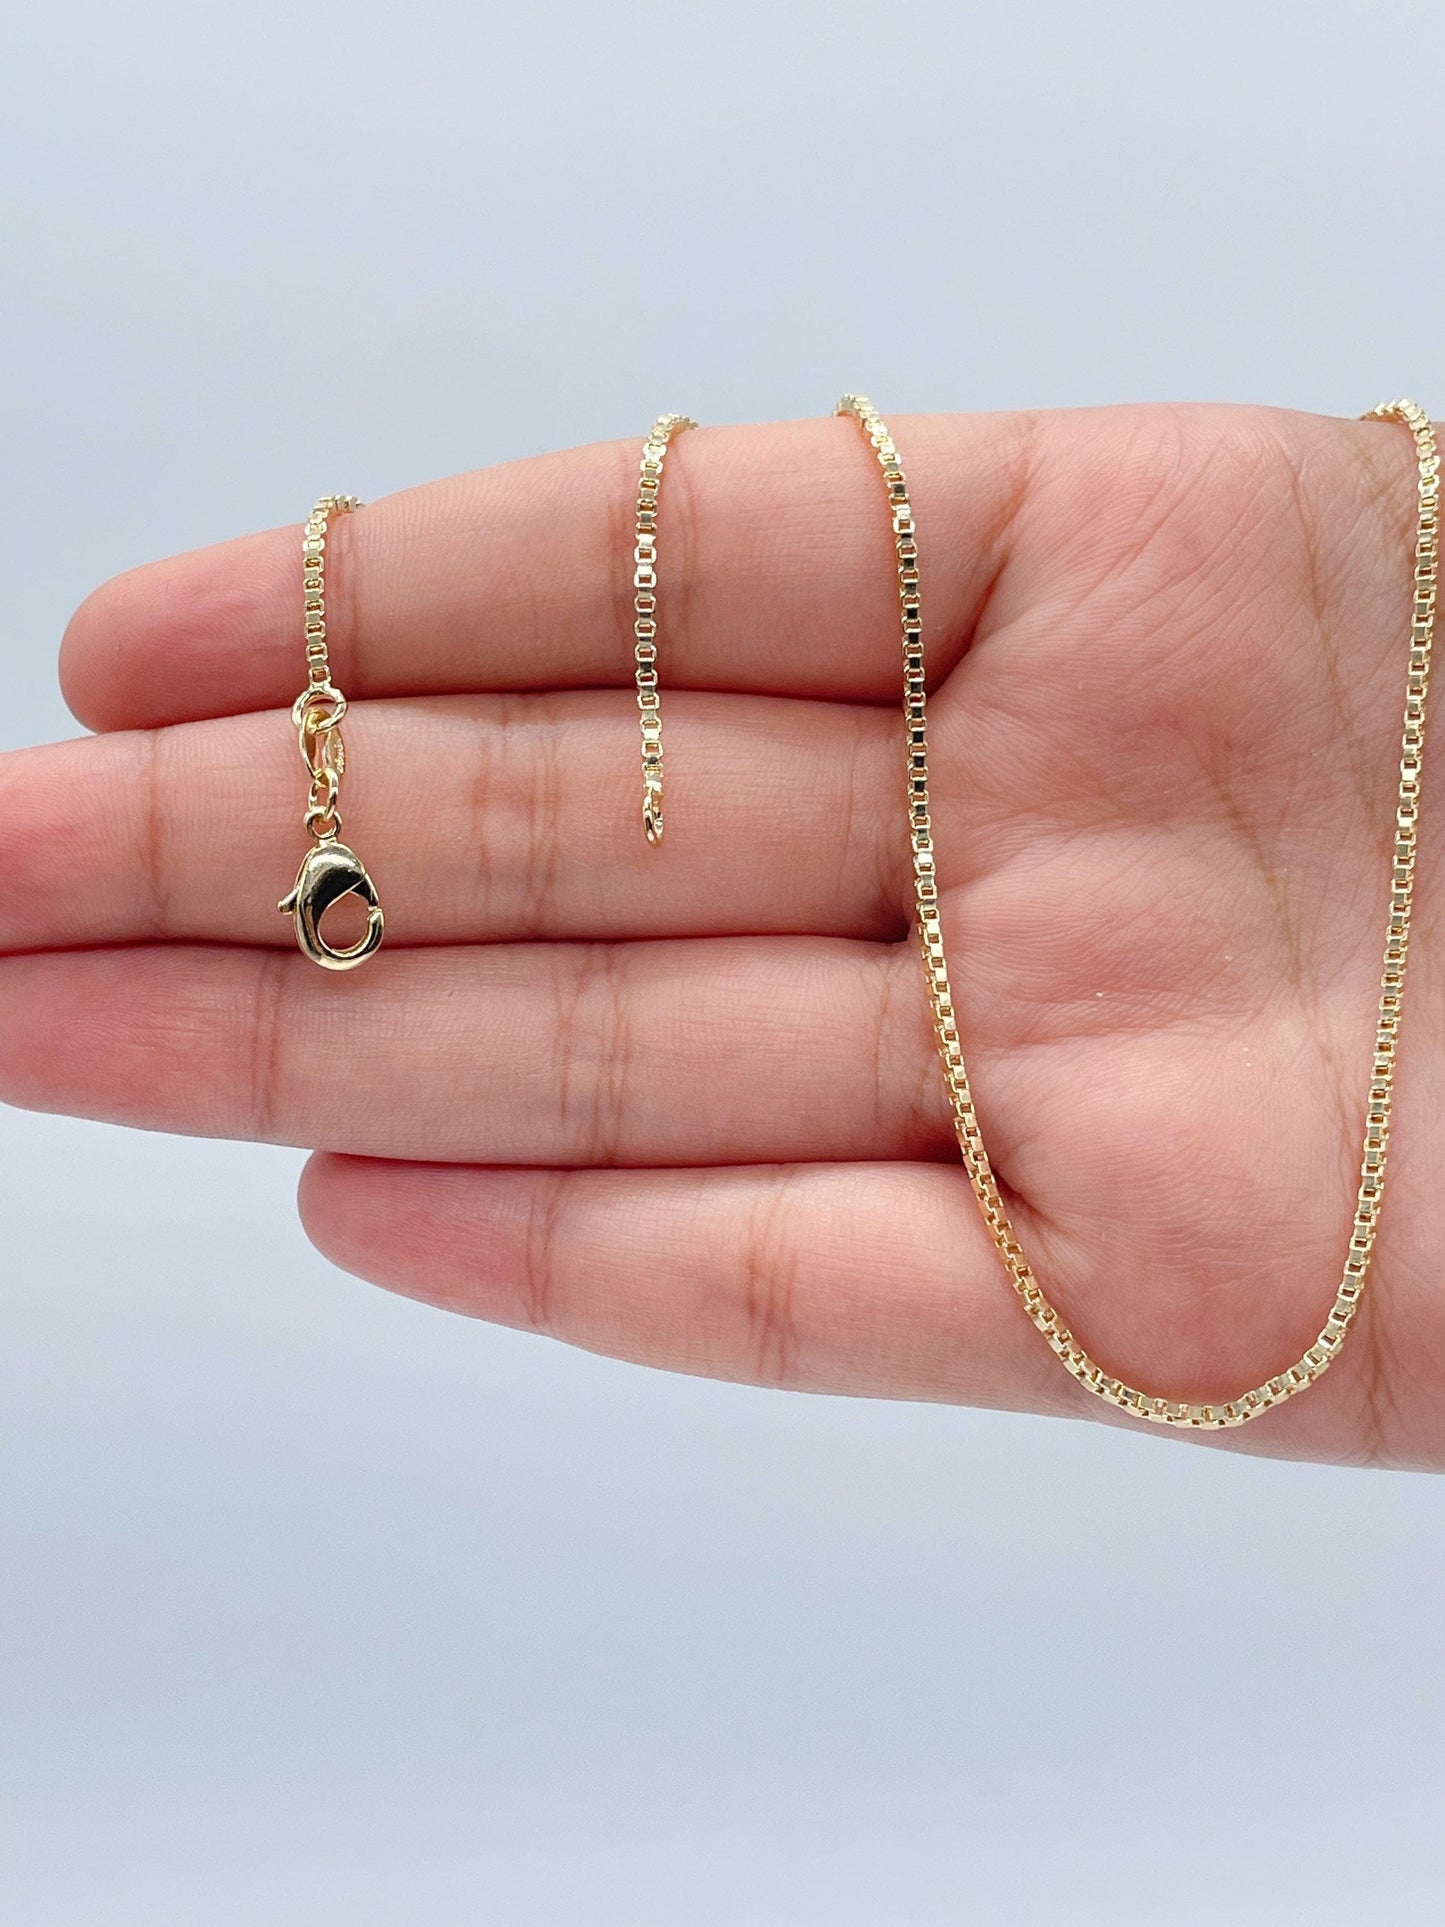 18k Gold Layered 1.5mm Thickness Box Chain, Available In 16” & 18” For